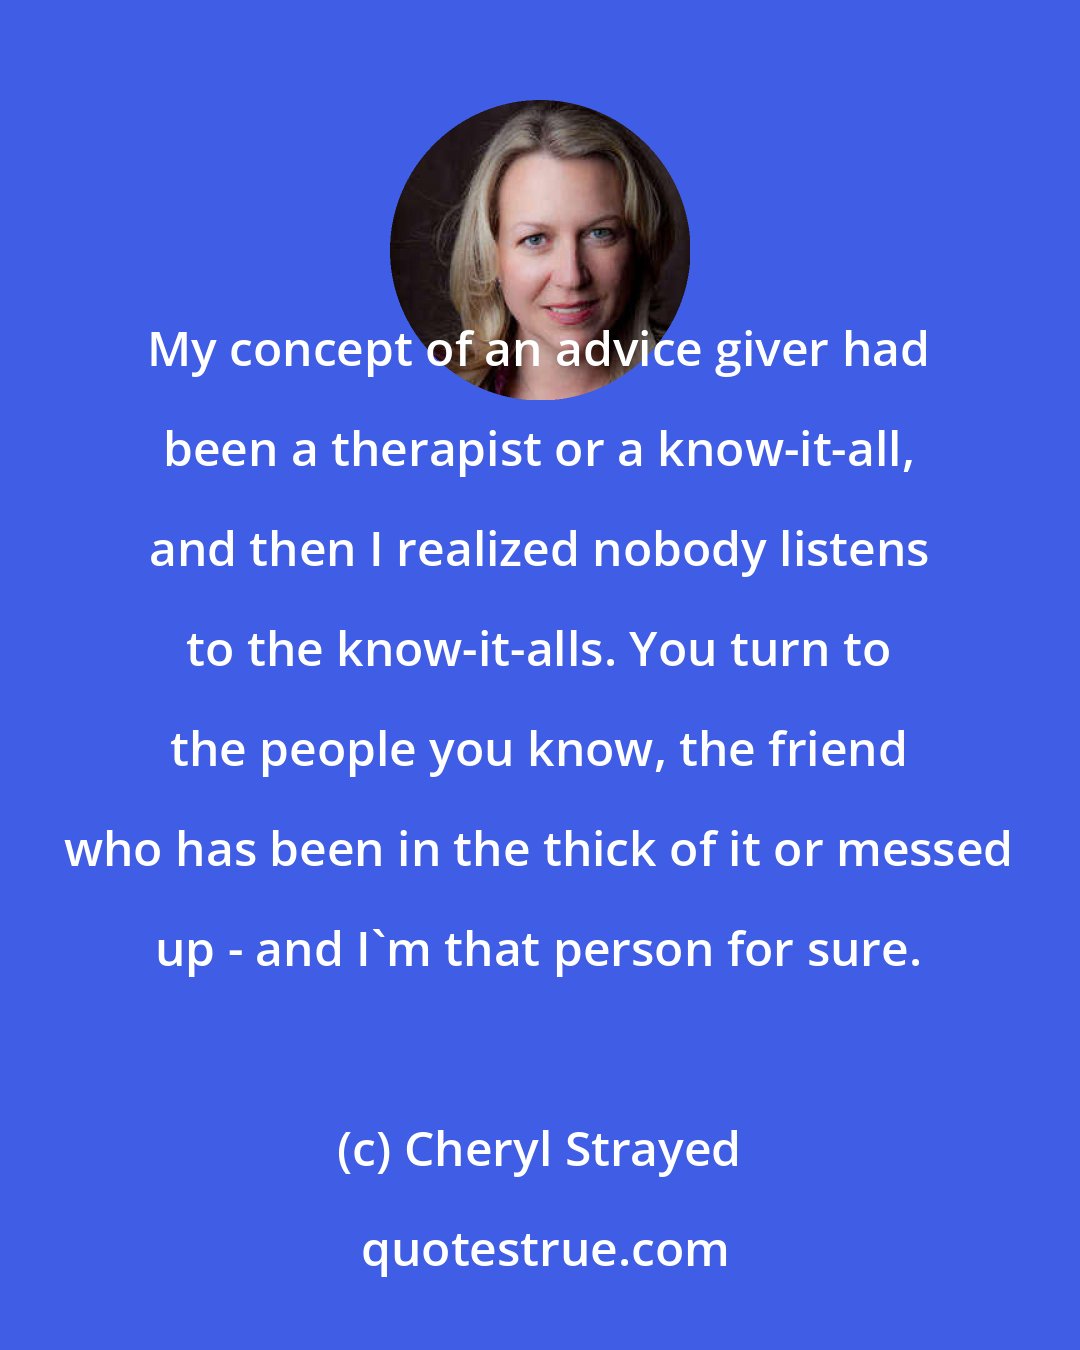 Cheryl Strayed: My concept of an advice giver had been a therapist or a know-it-all, and then I realized nobody listens to the know-it-alls. You turn to the people you know, the friend who has been in the thick of it or messed up - and I'm that person for sure.